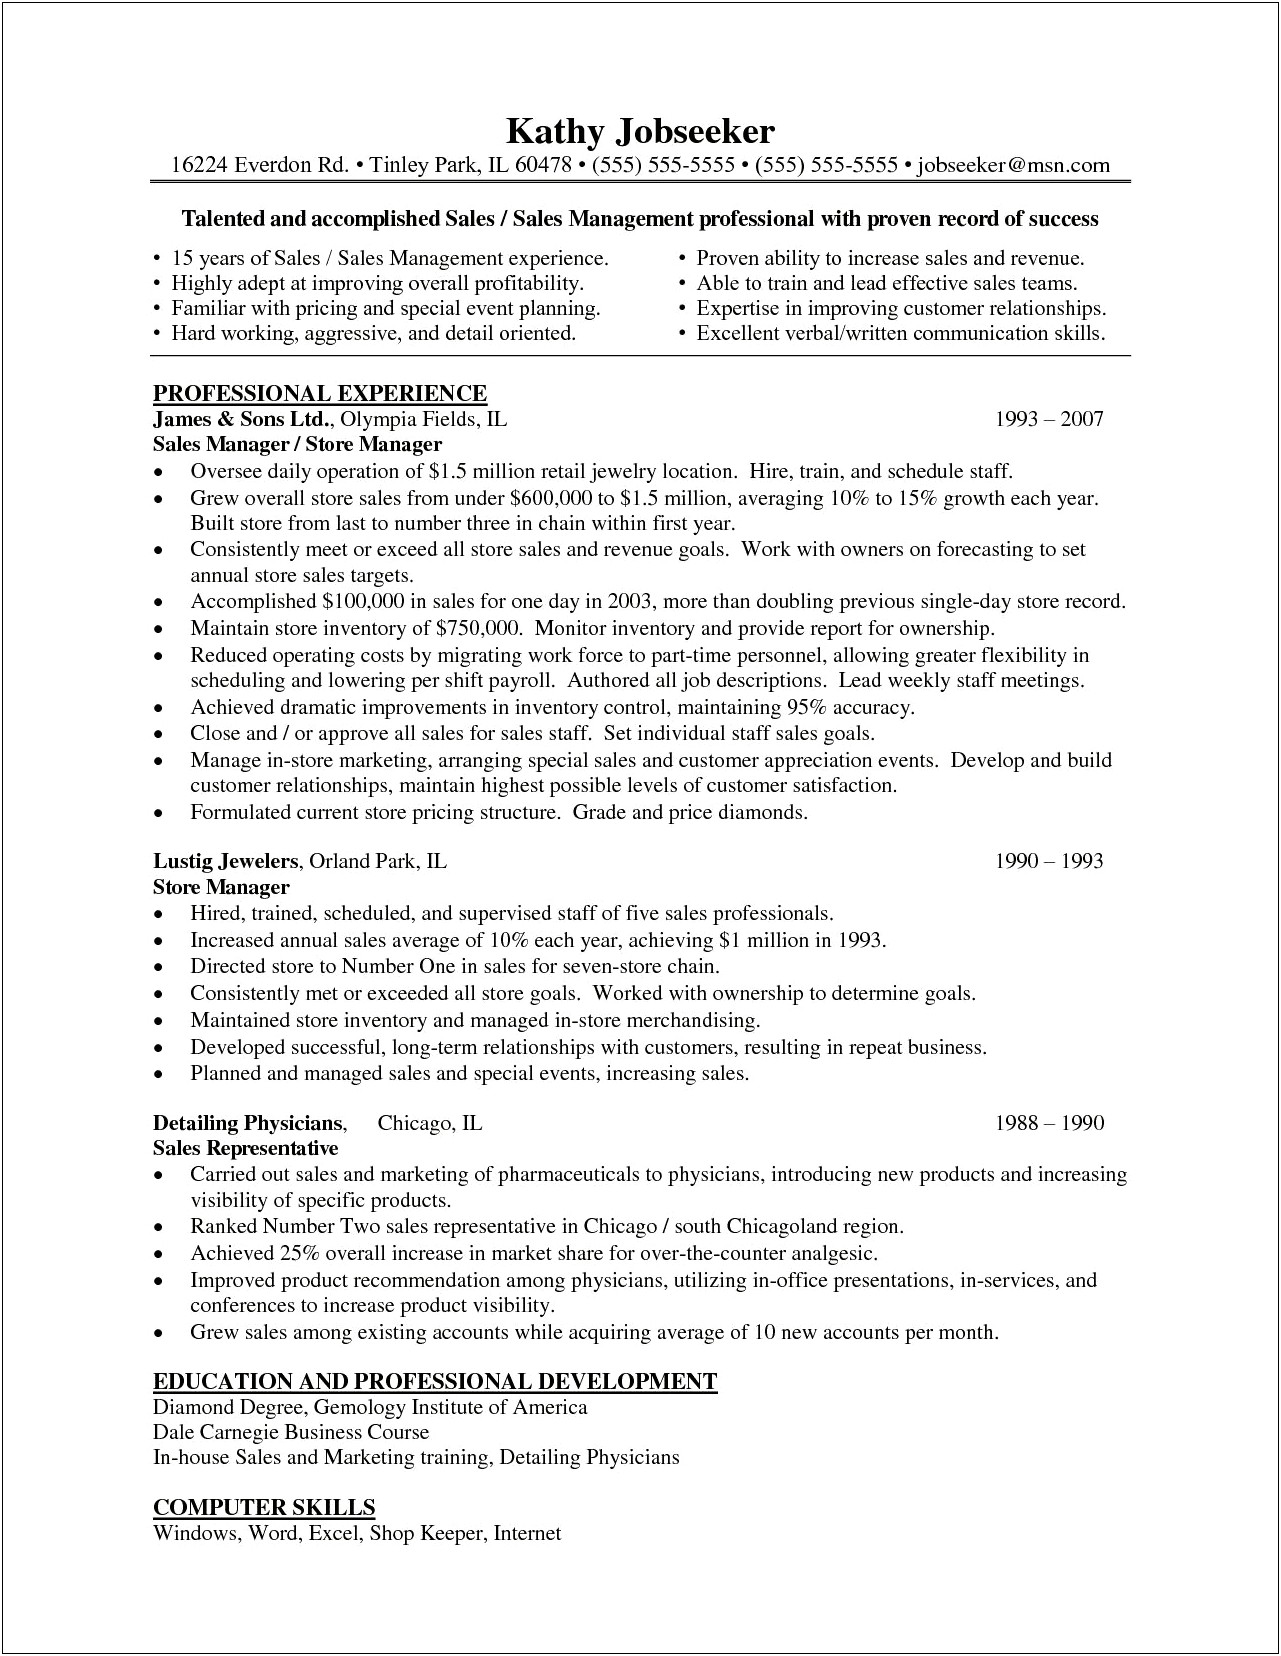 Resume Examples For Lead Trainee In Retail